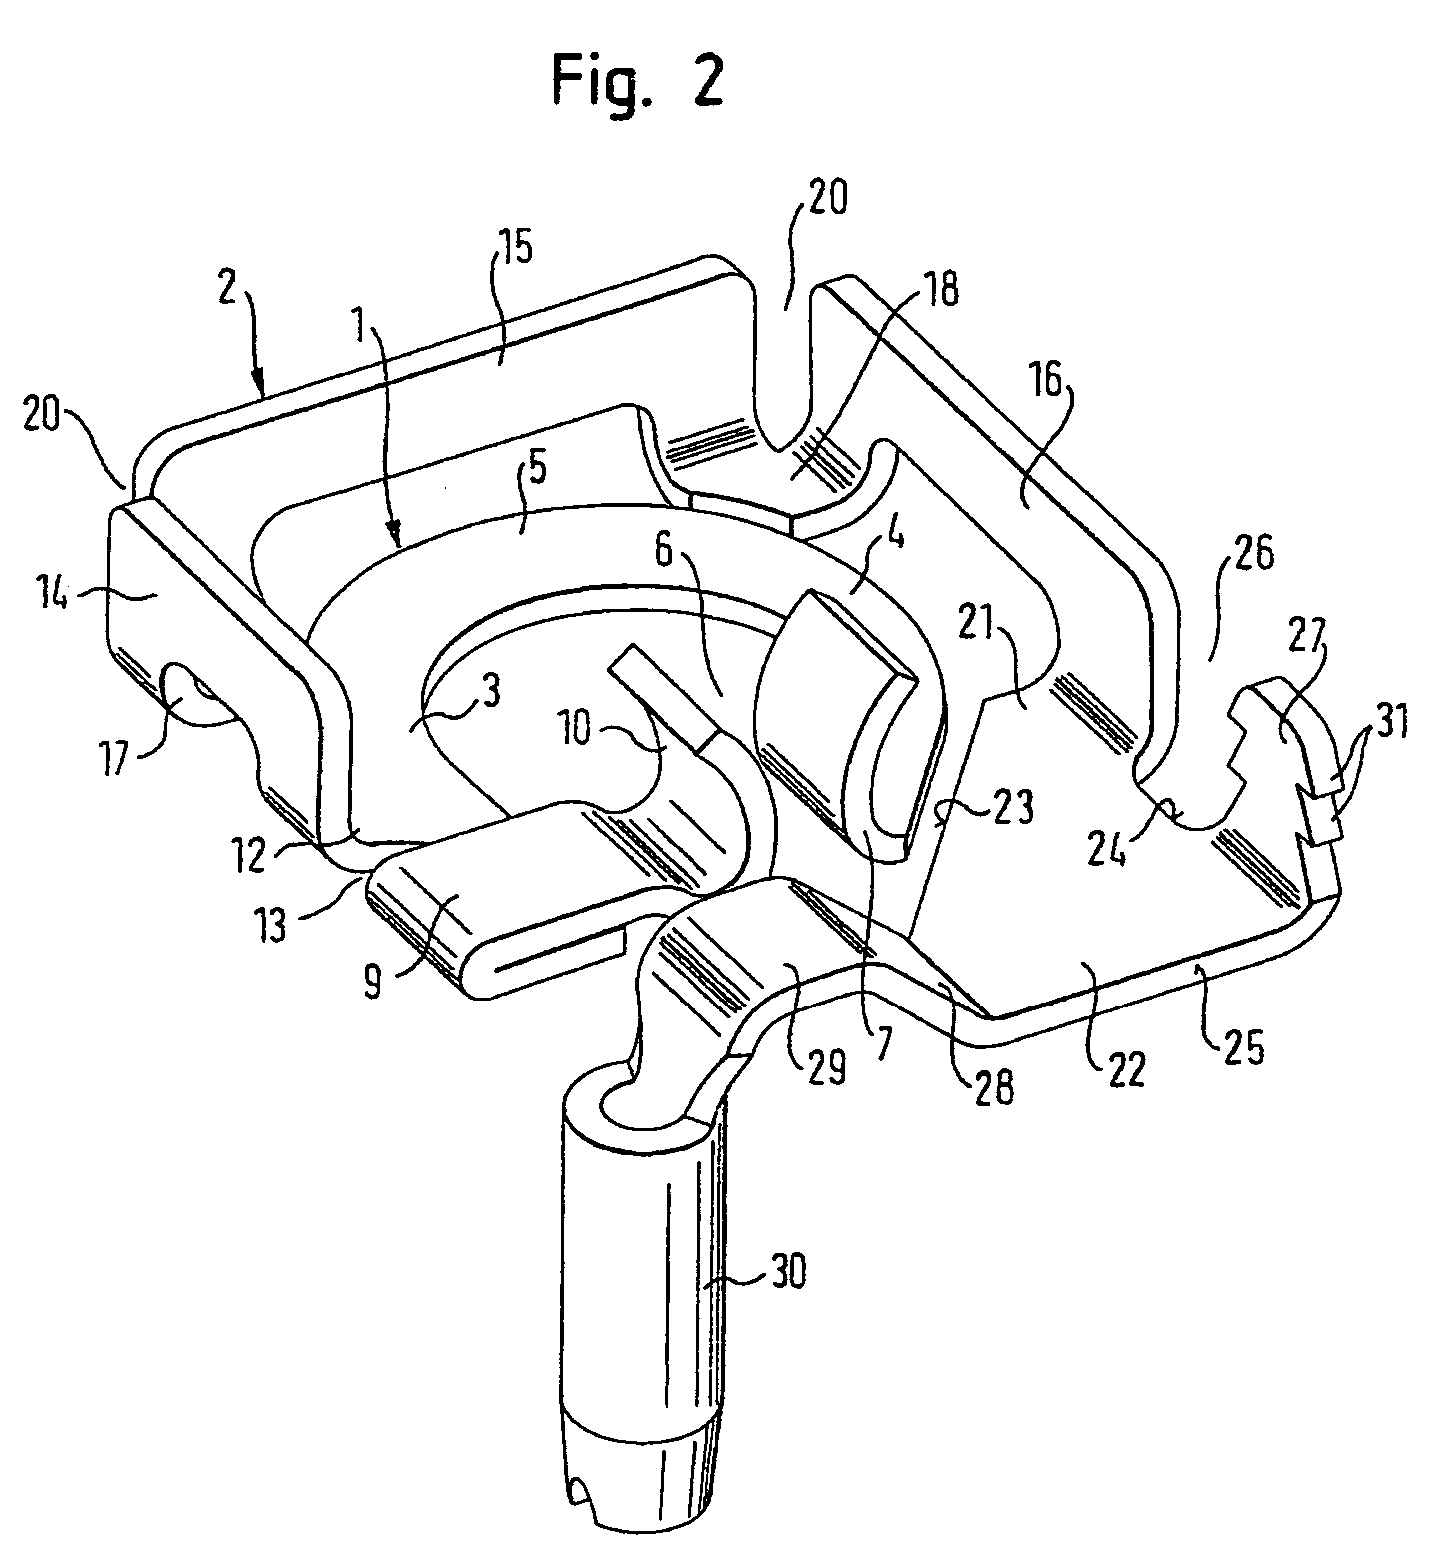 Electrical contact element as well as contacting device having a contact element